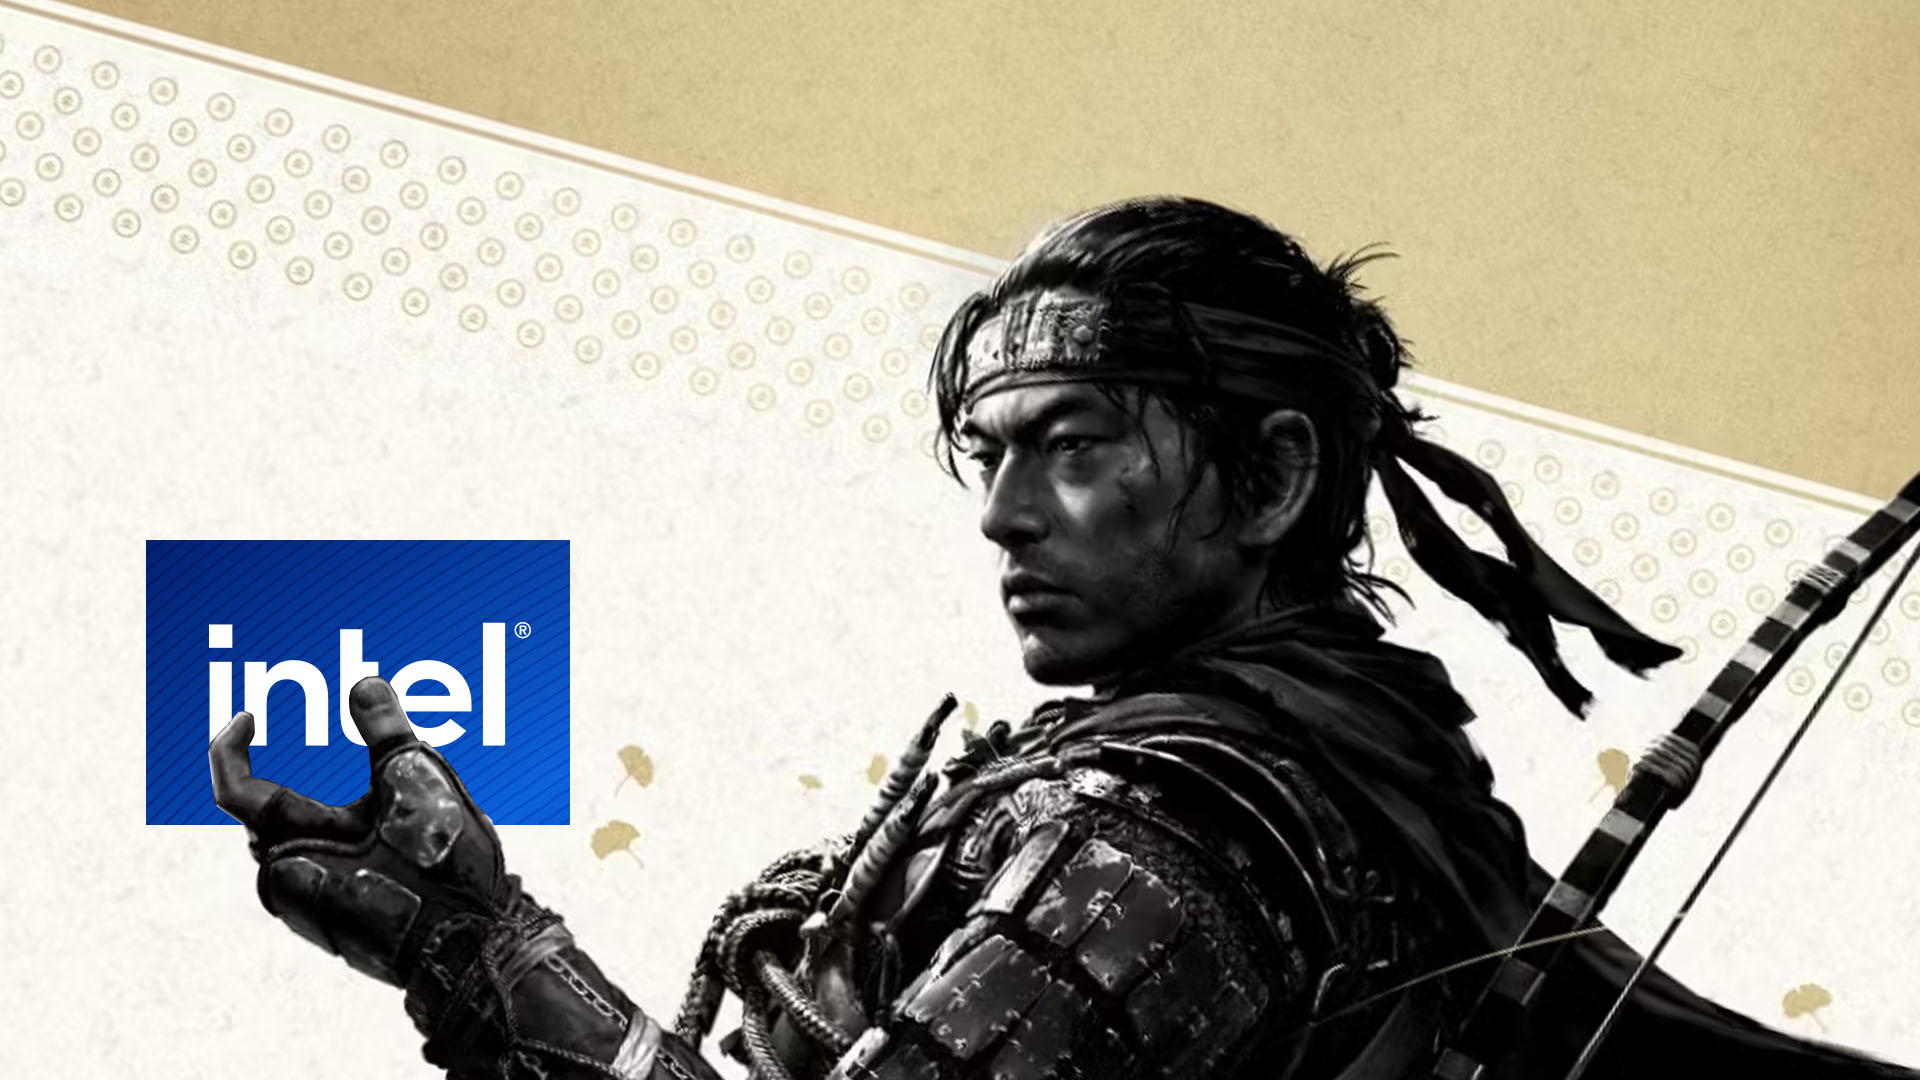 Gear up for Ghost of Tsushima with this free Intel download